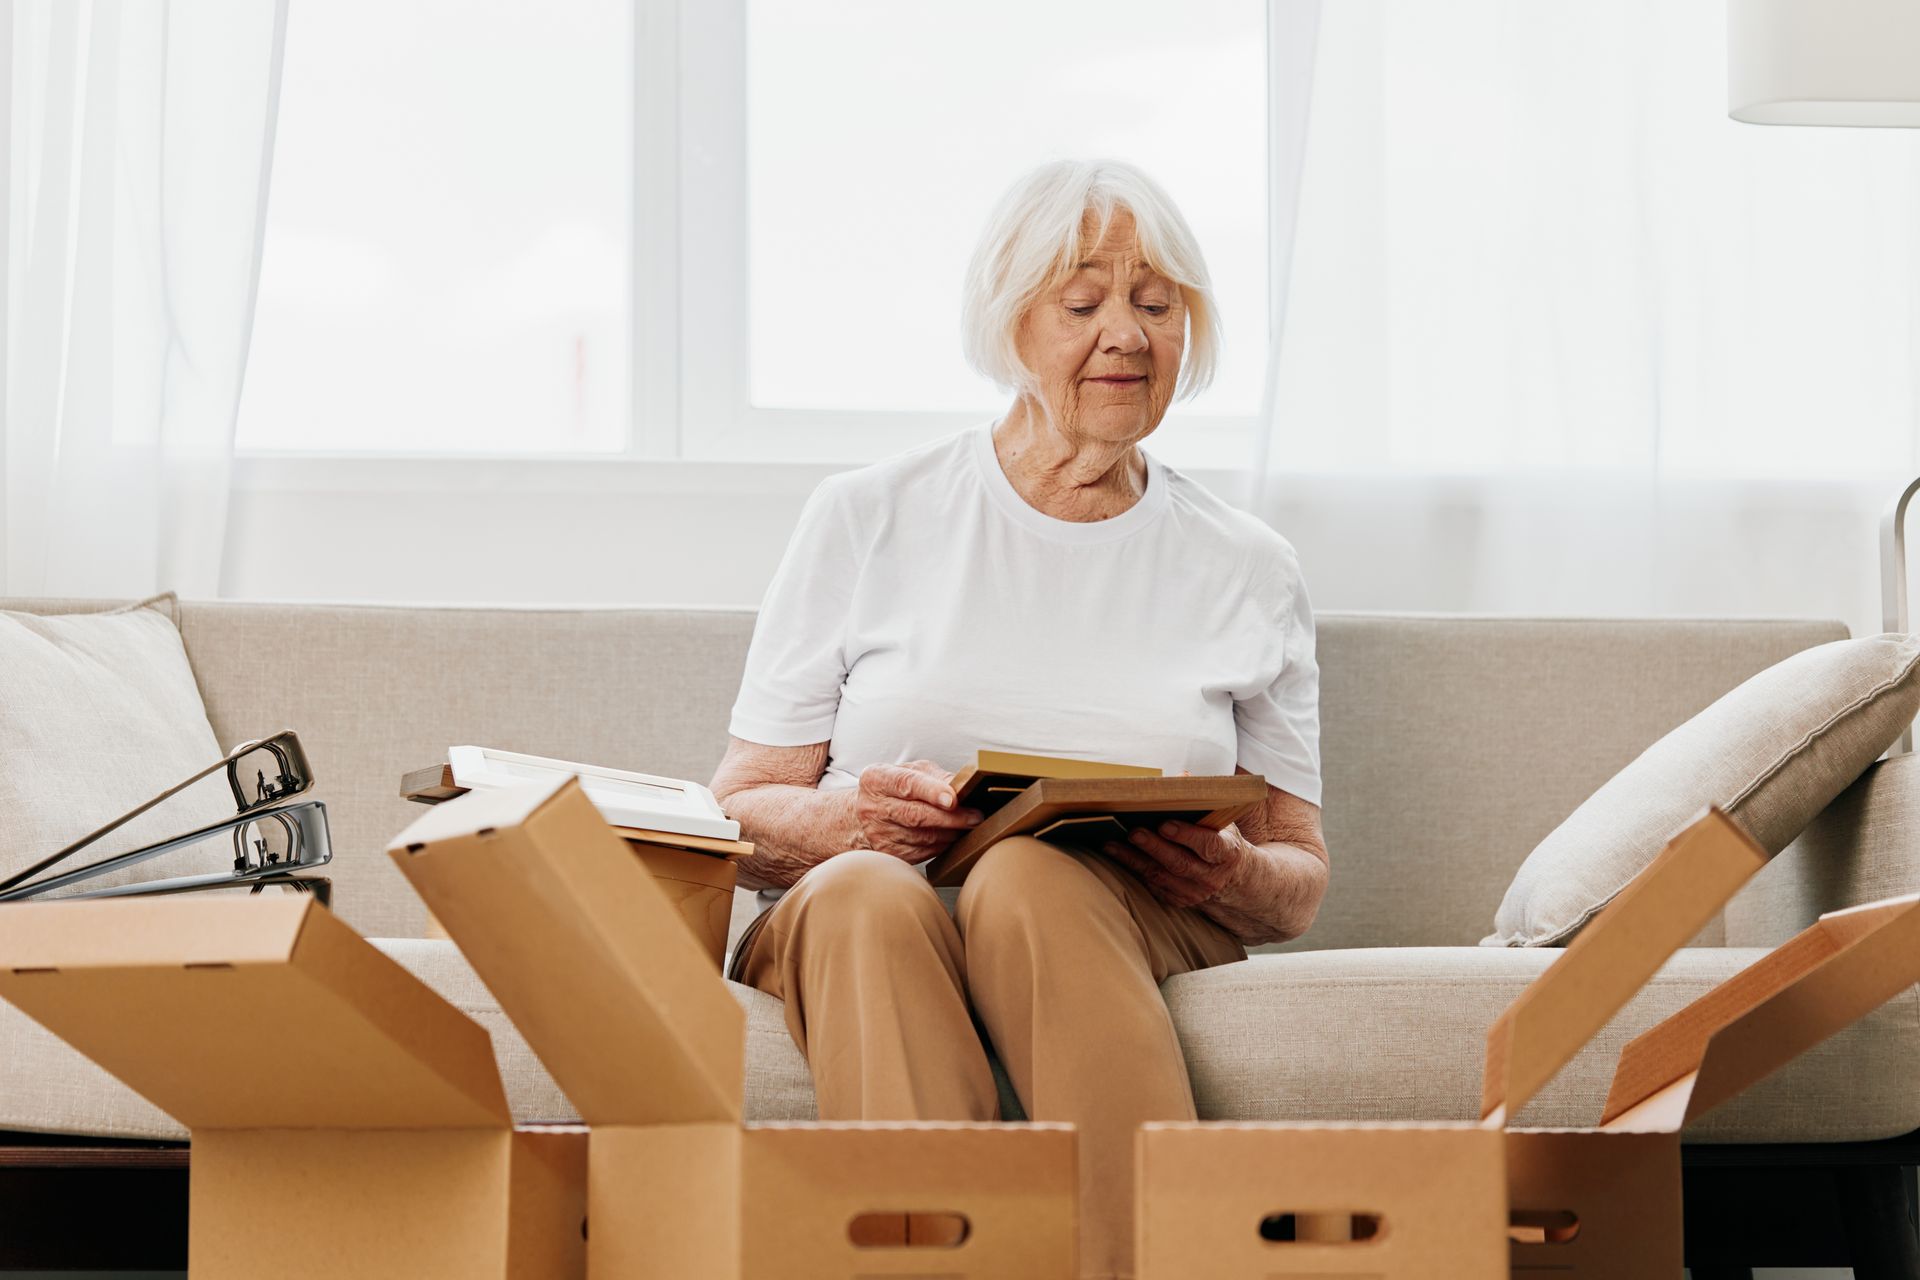 an elderly woman sits on a couch surrounded by cardboard boxes